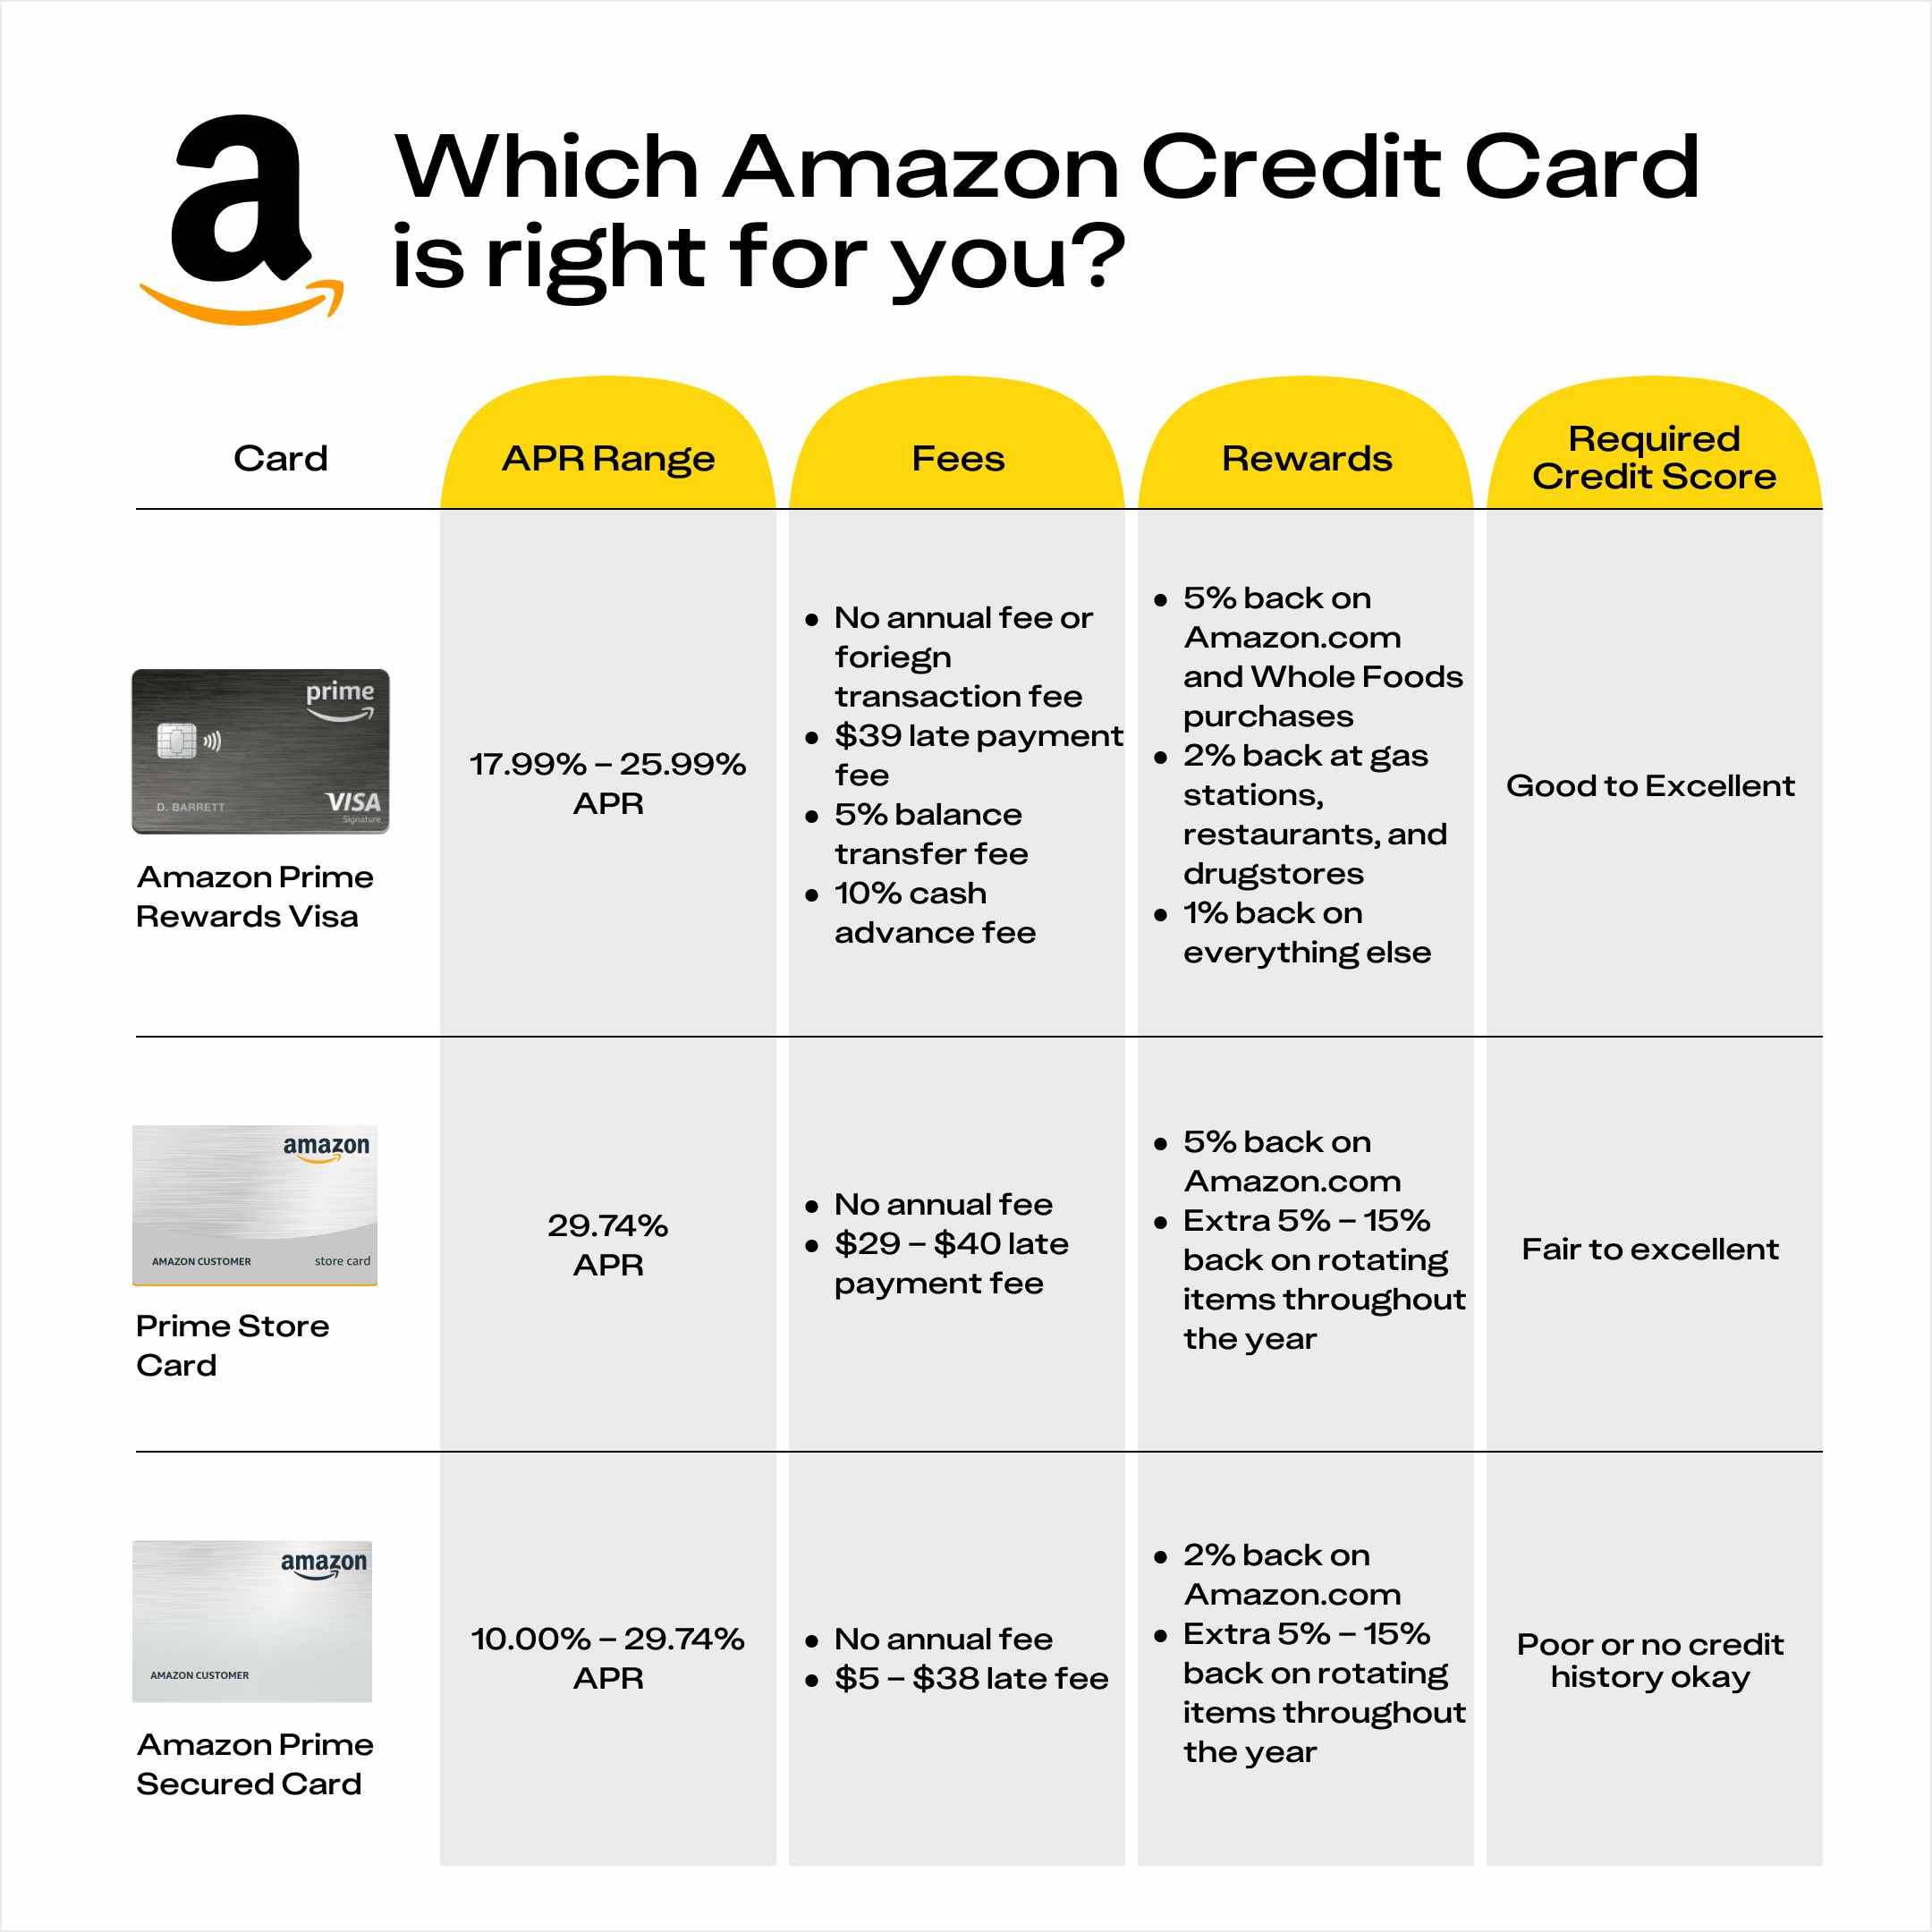 Which Amazon Credit Card is right for you